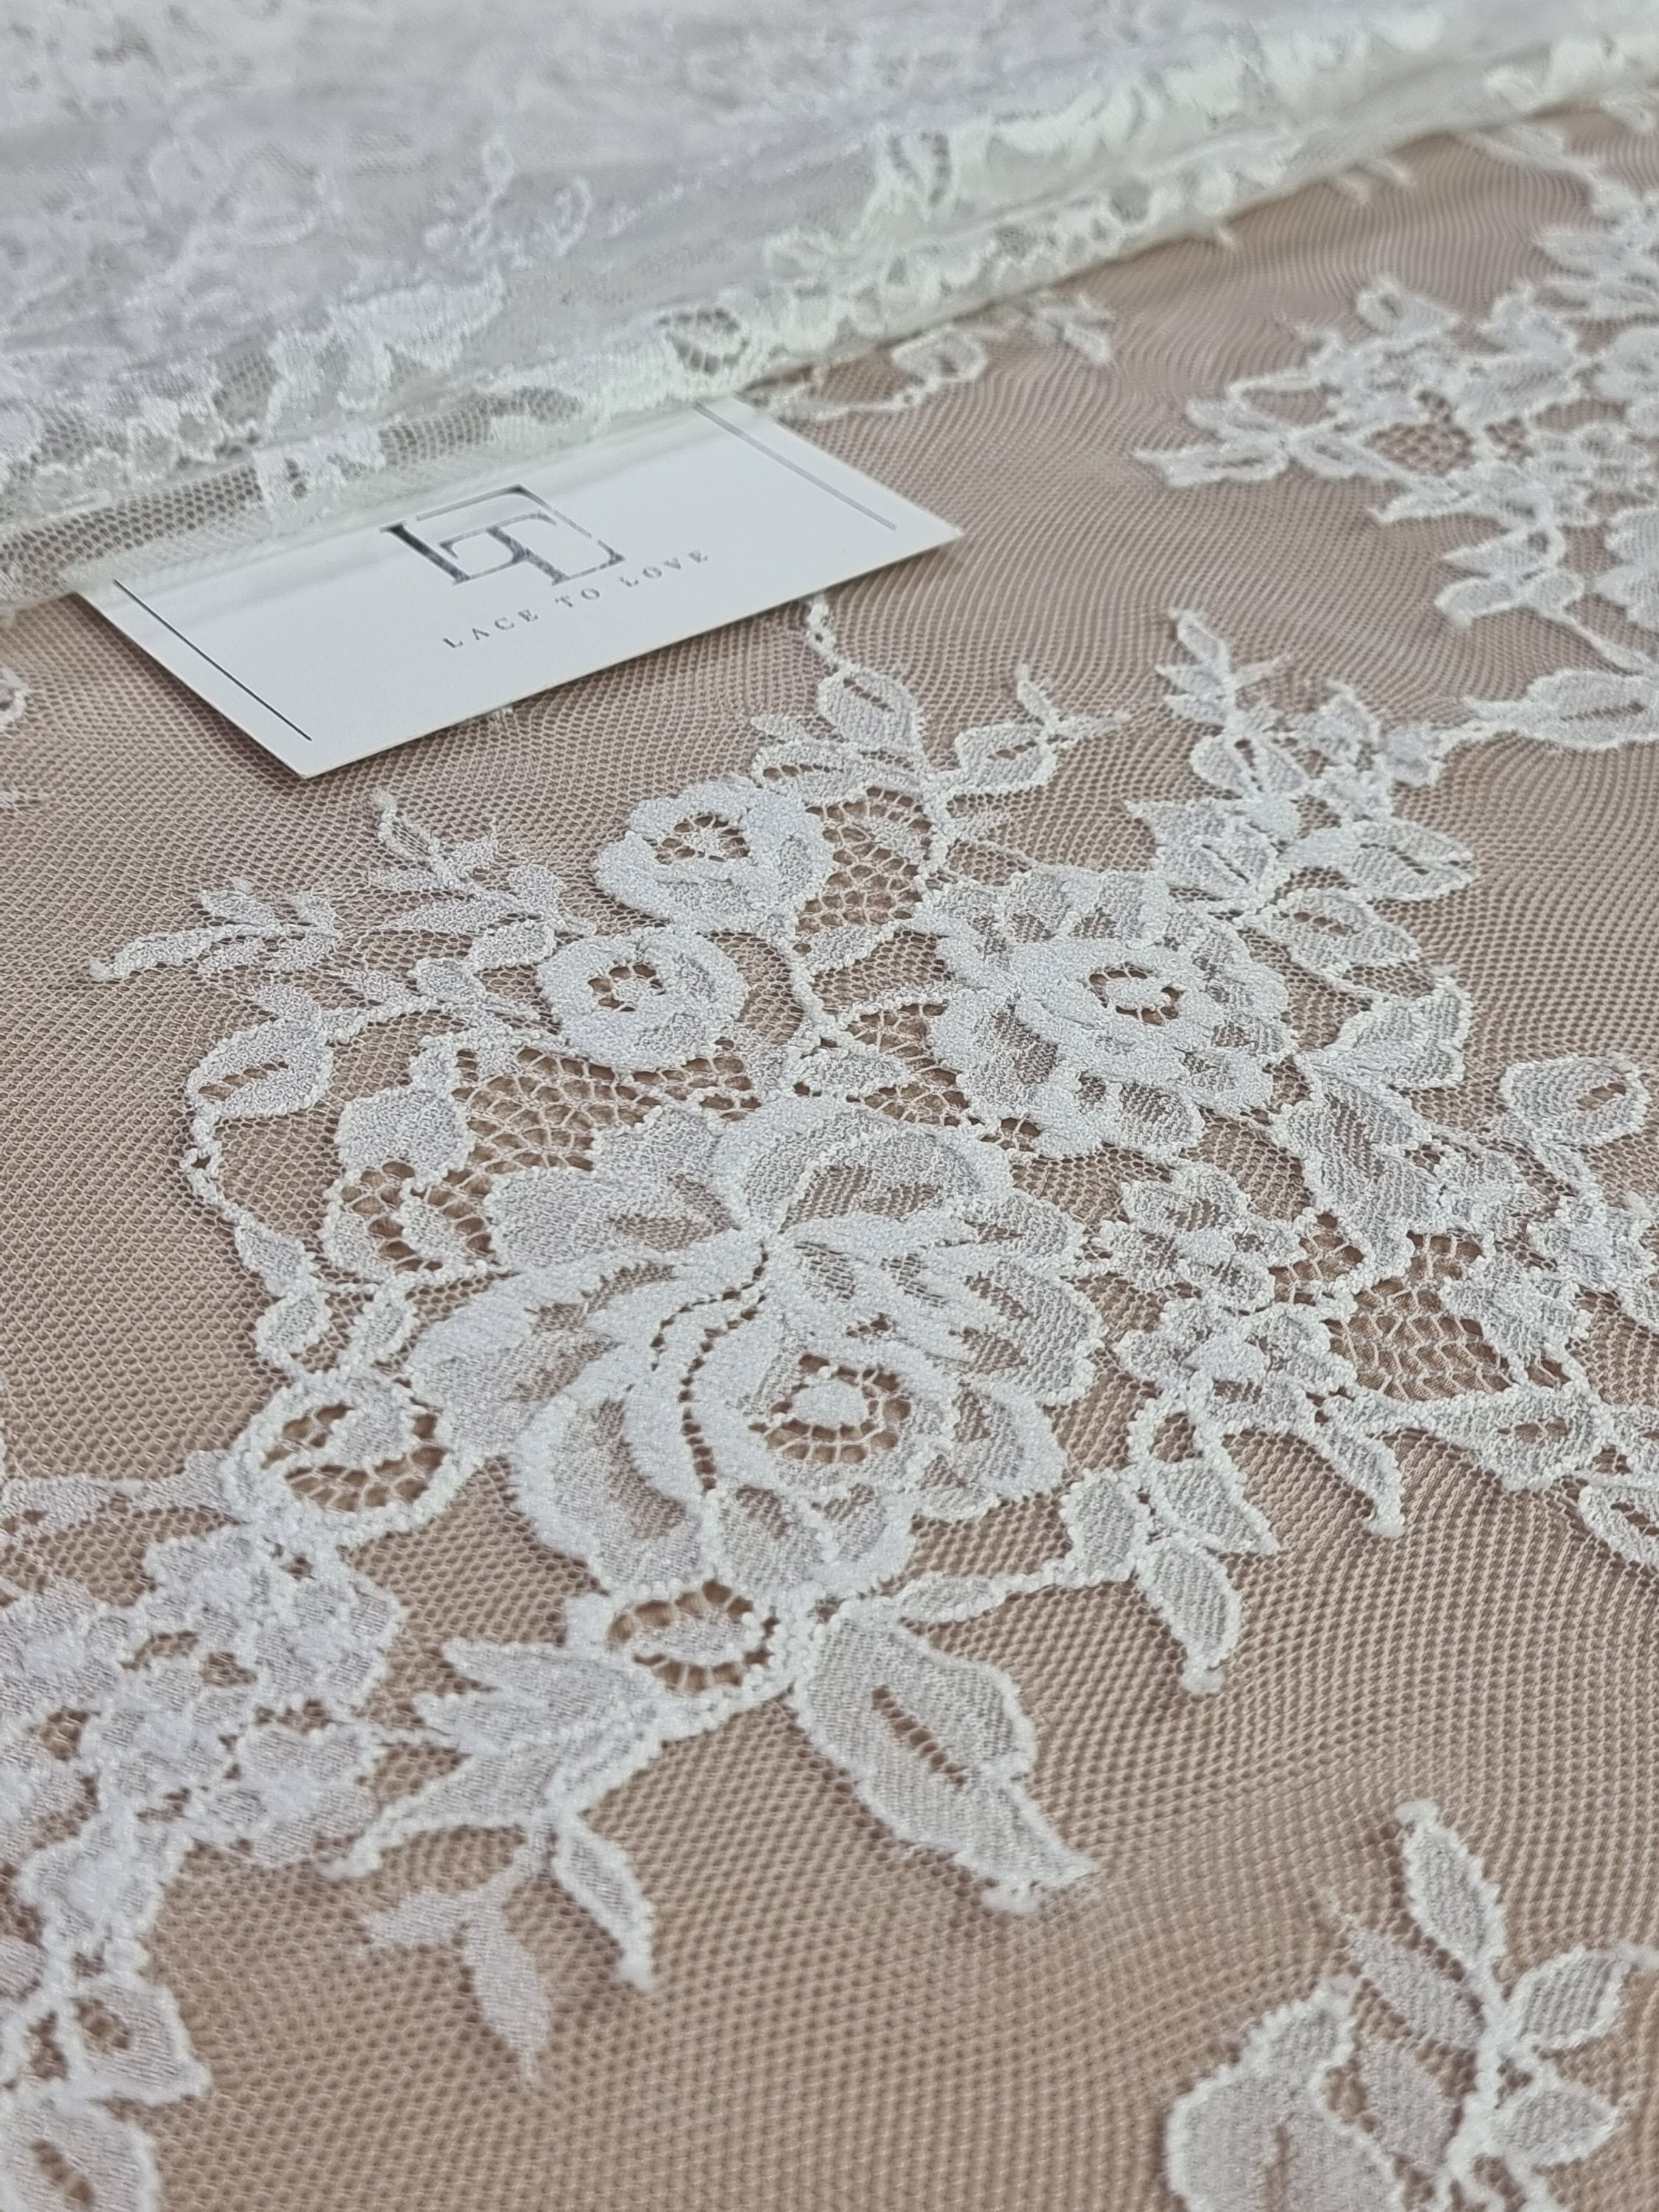 Off White Lace Fabric, French Lace, Chantilly Lace, Bridal Lace